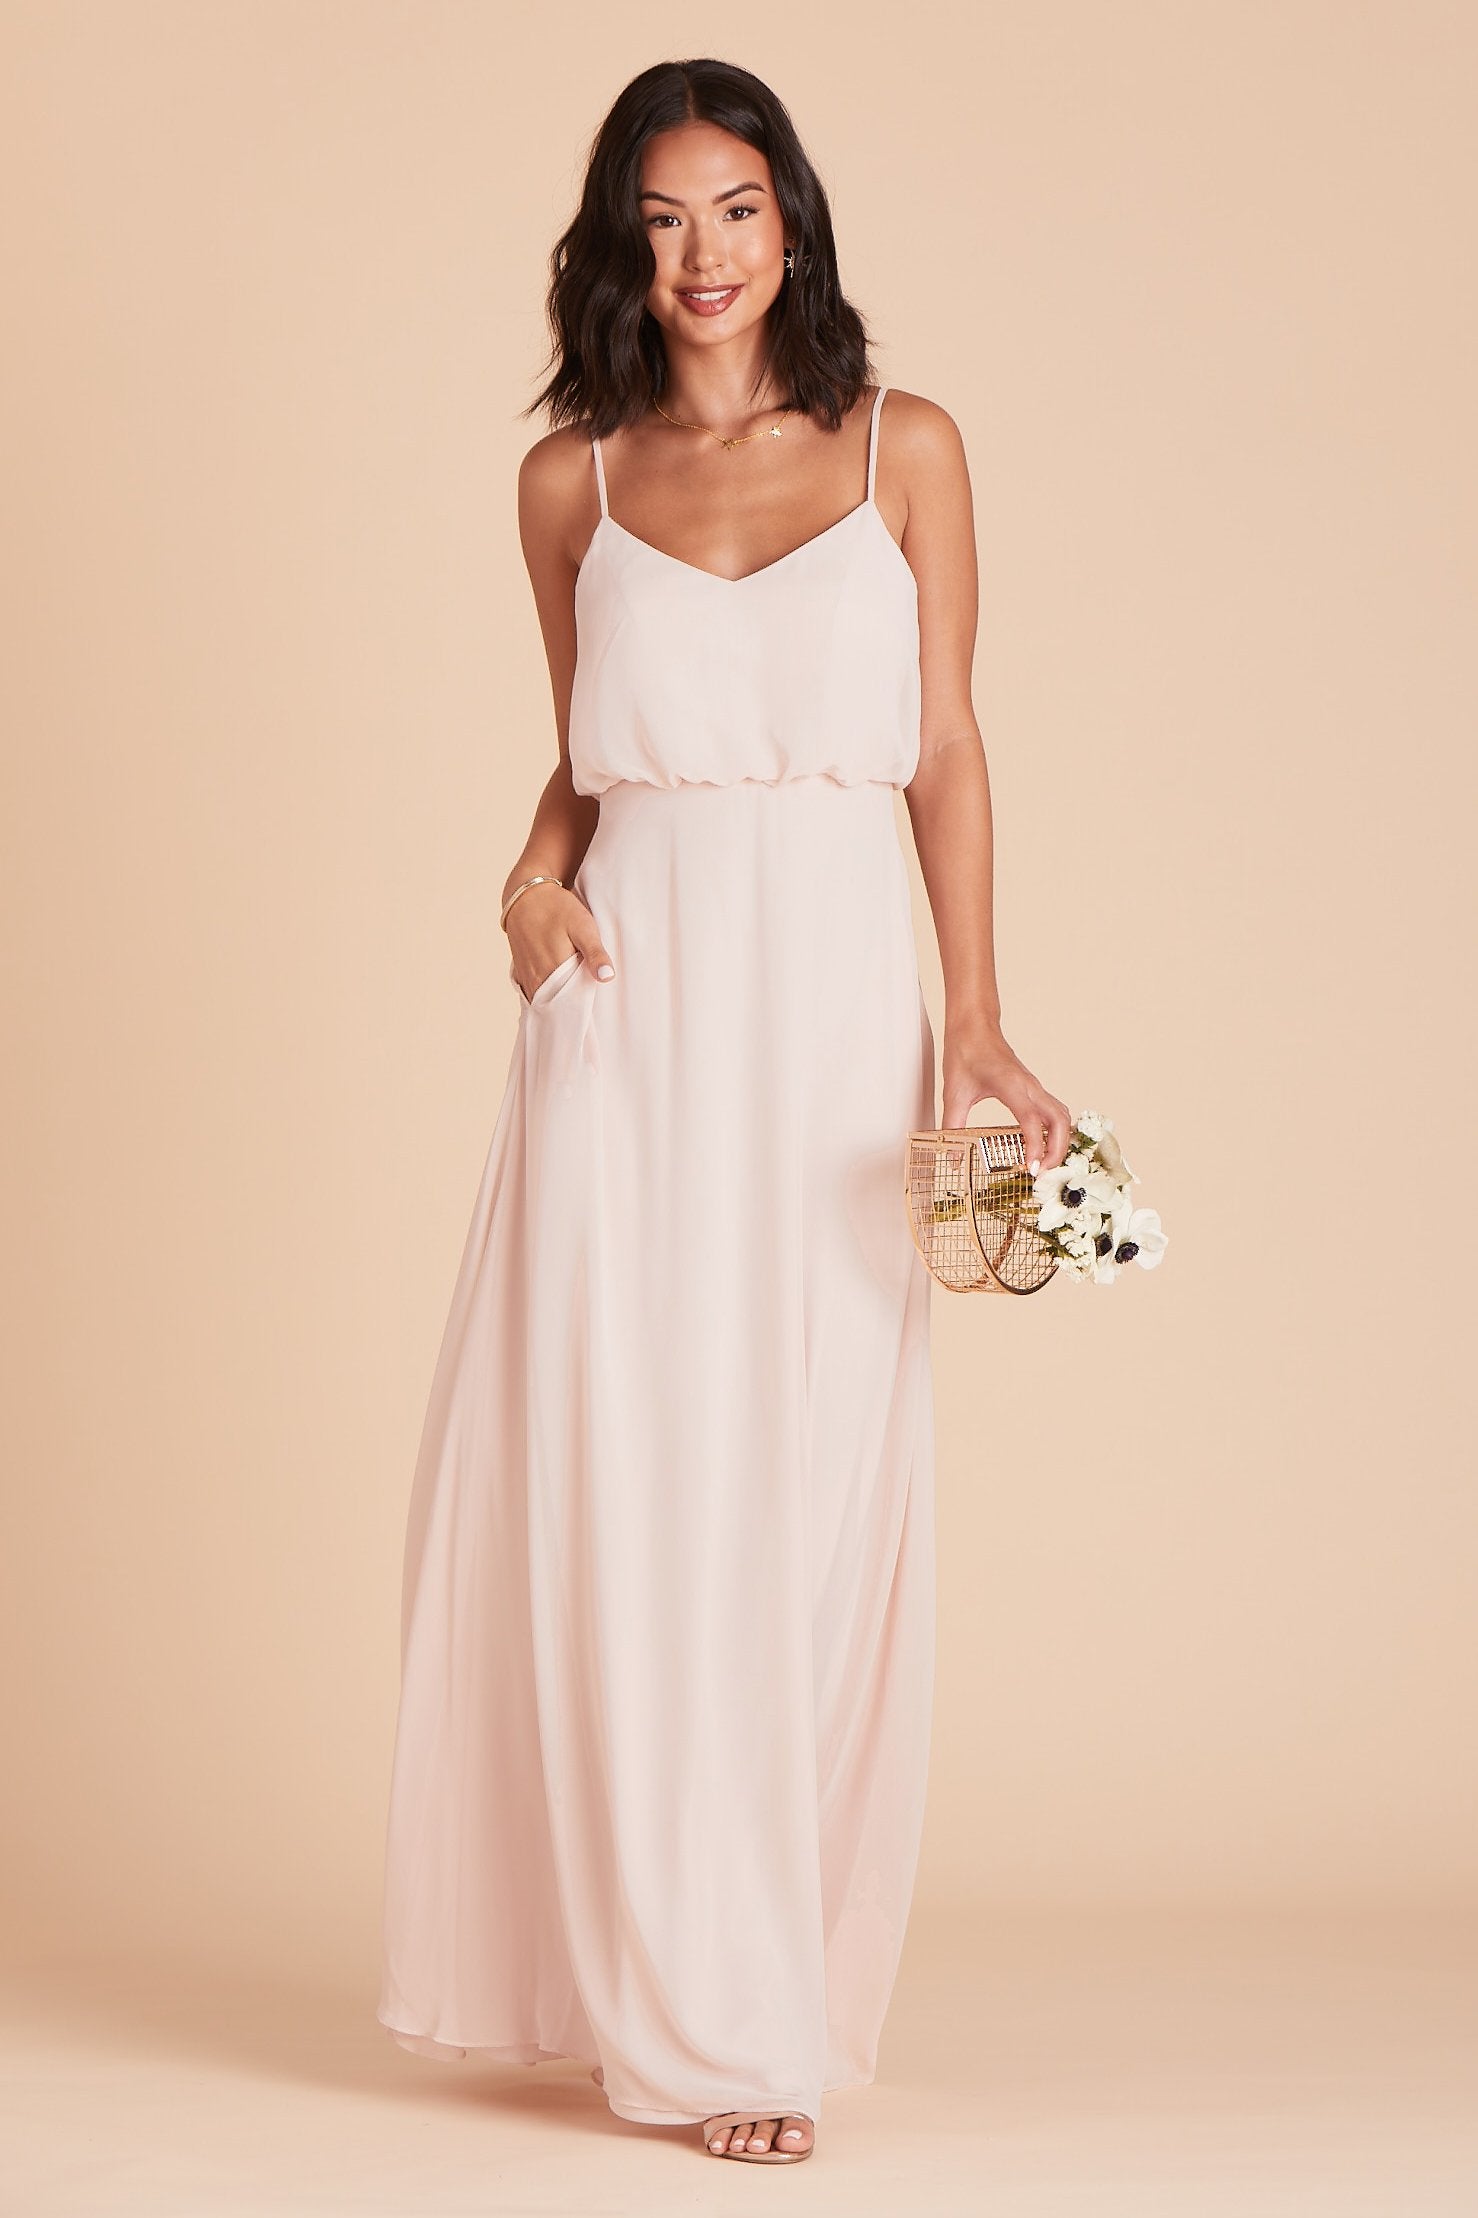 Gwennie bridesmaid dress in pale blush chiffon by Birdy Grey, front view with hand in pocket